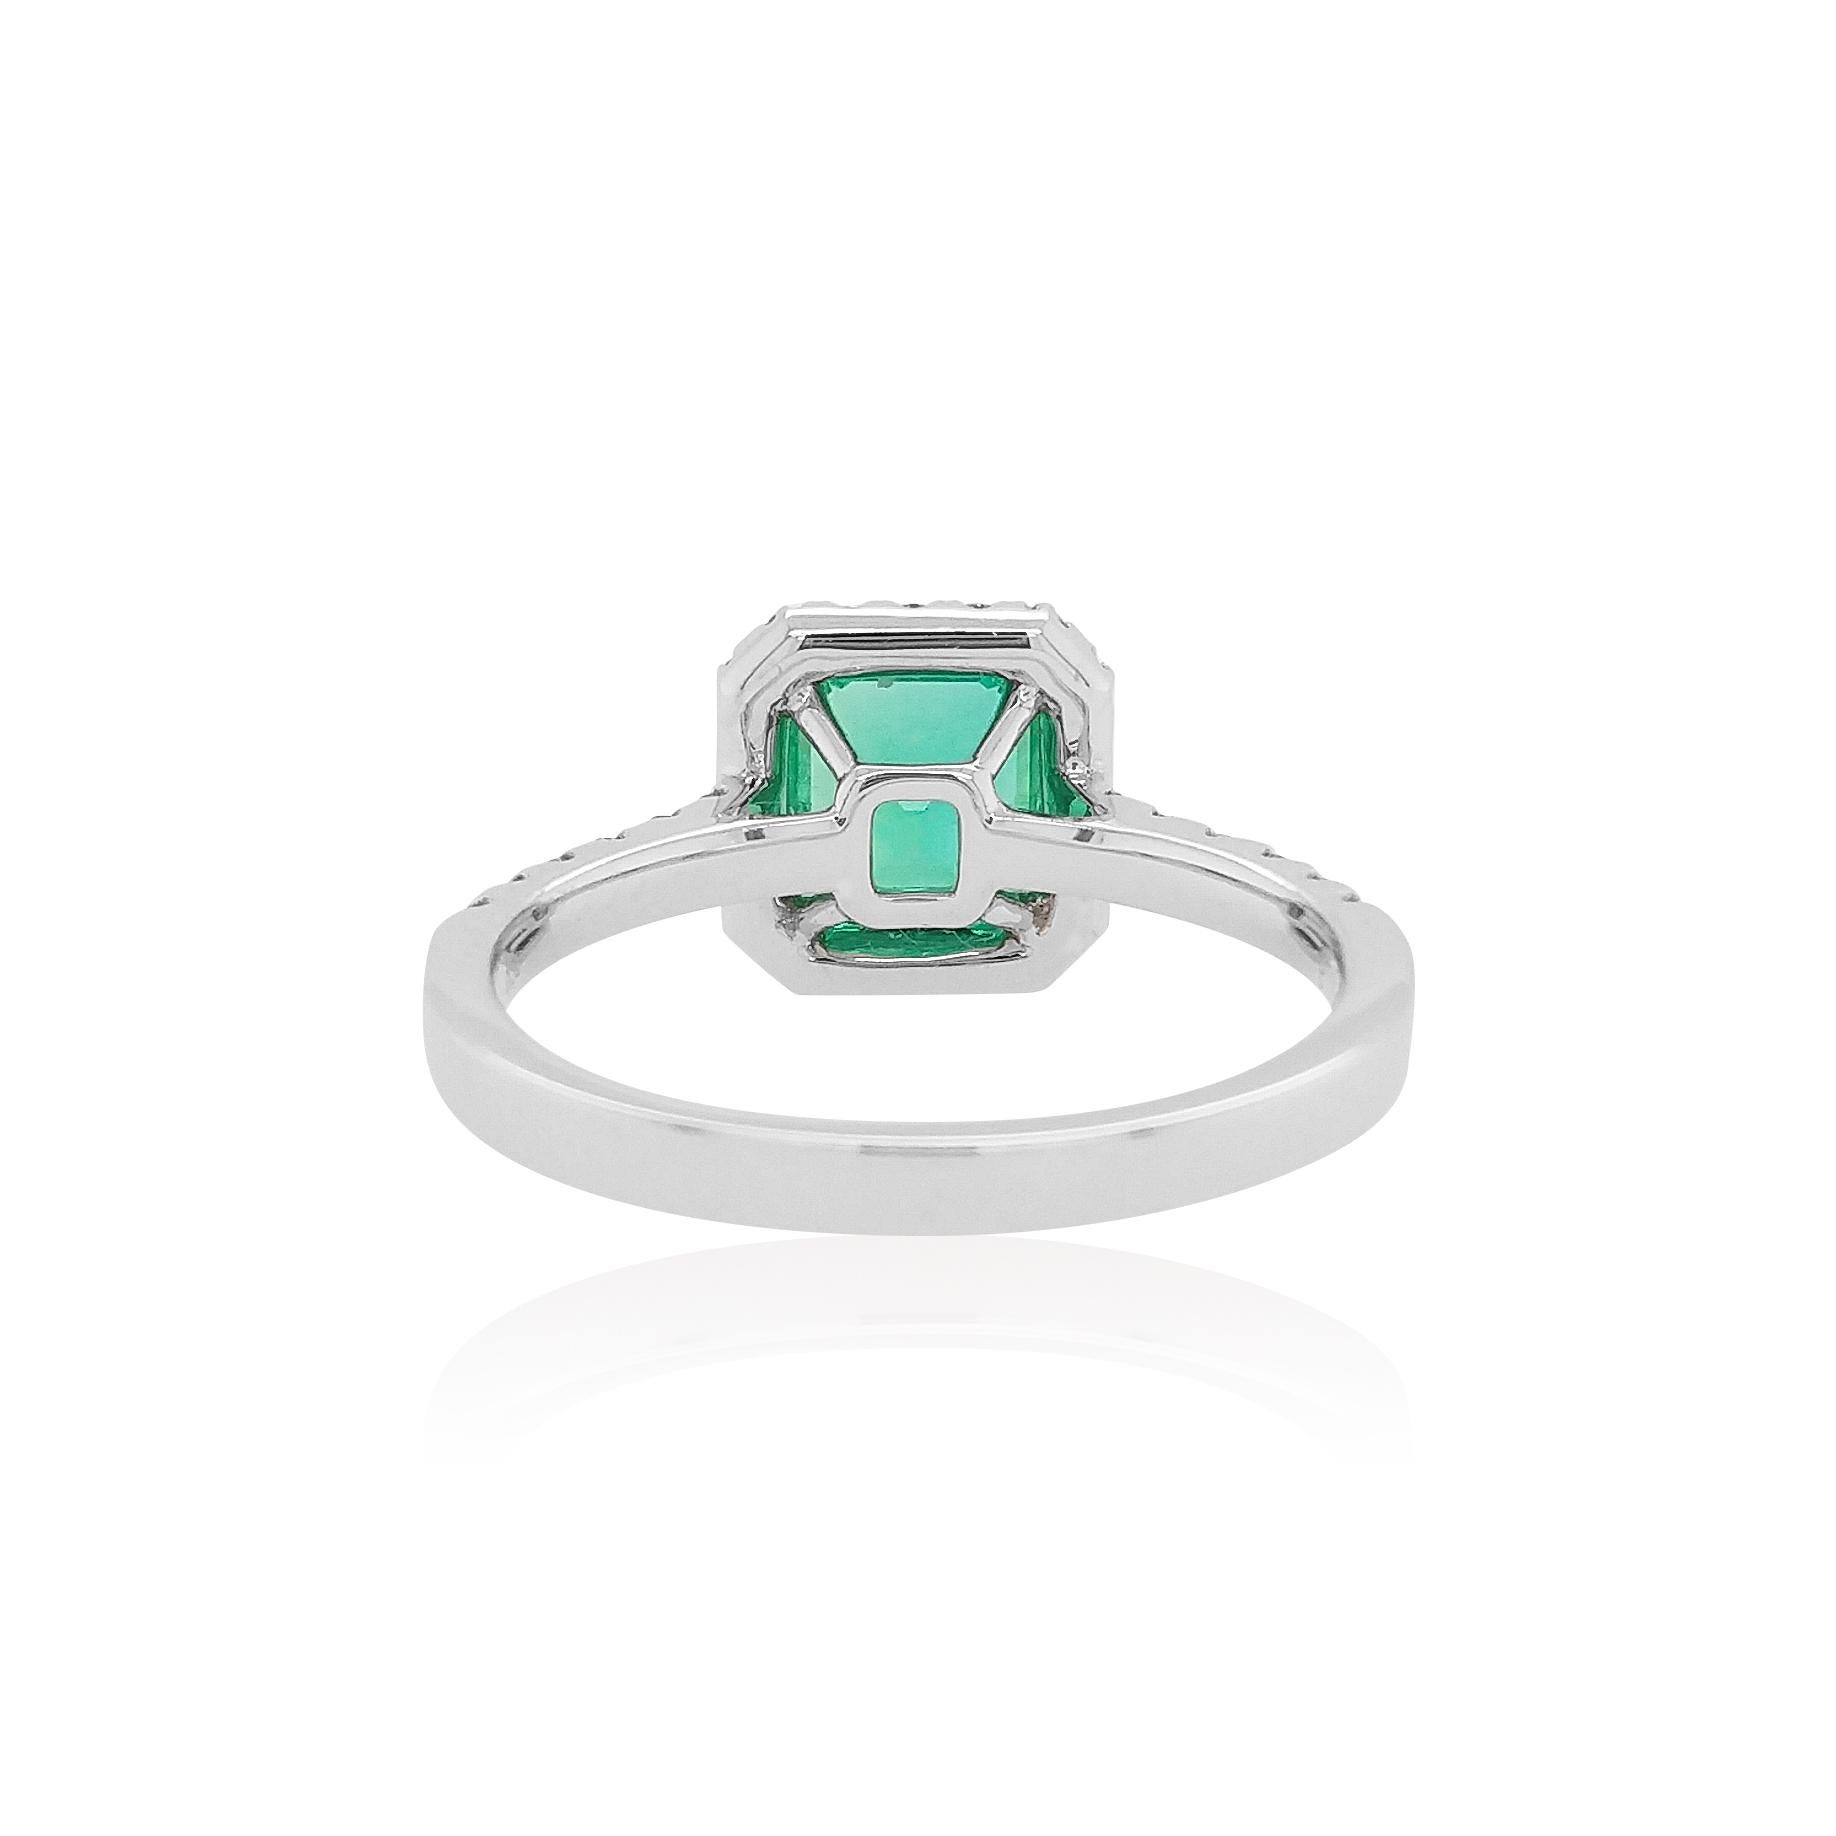 This ring features alluring Colombian Emerald, accentuated by a halo of pavé set White Diamonds. Combine with glamorous outfits for a show-stopping effect. Each stone hand-selected by our experts for its superior lustre and surface